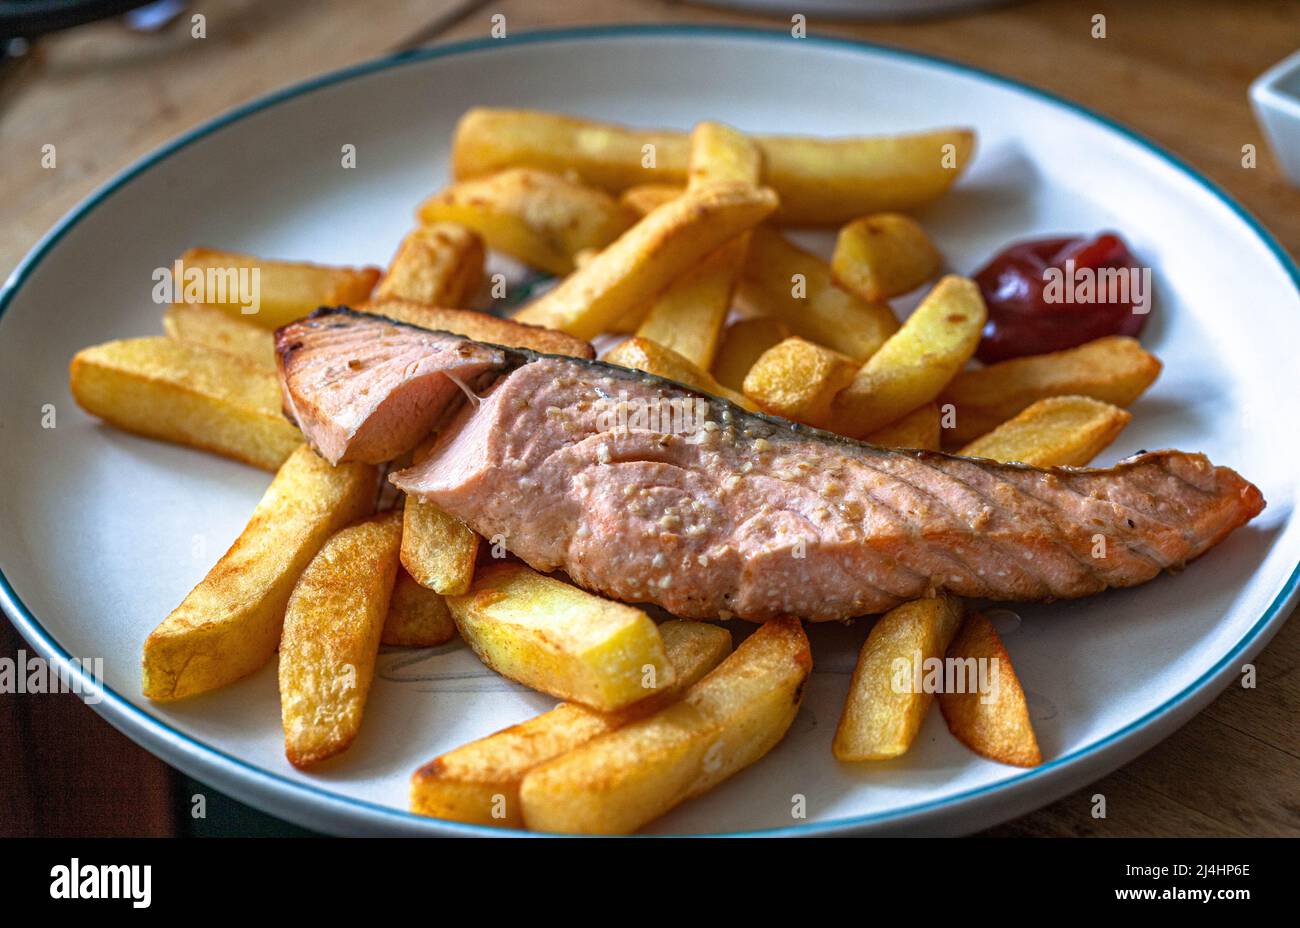 A plate with homemade fish and chips. Stock Photo